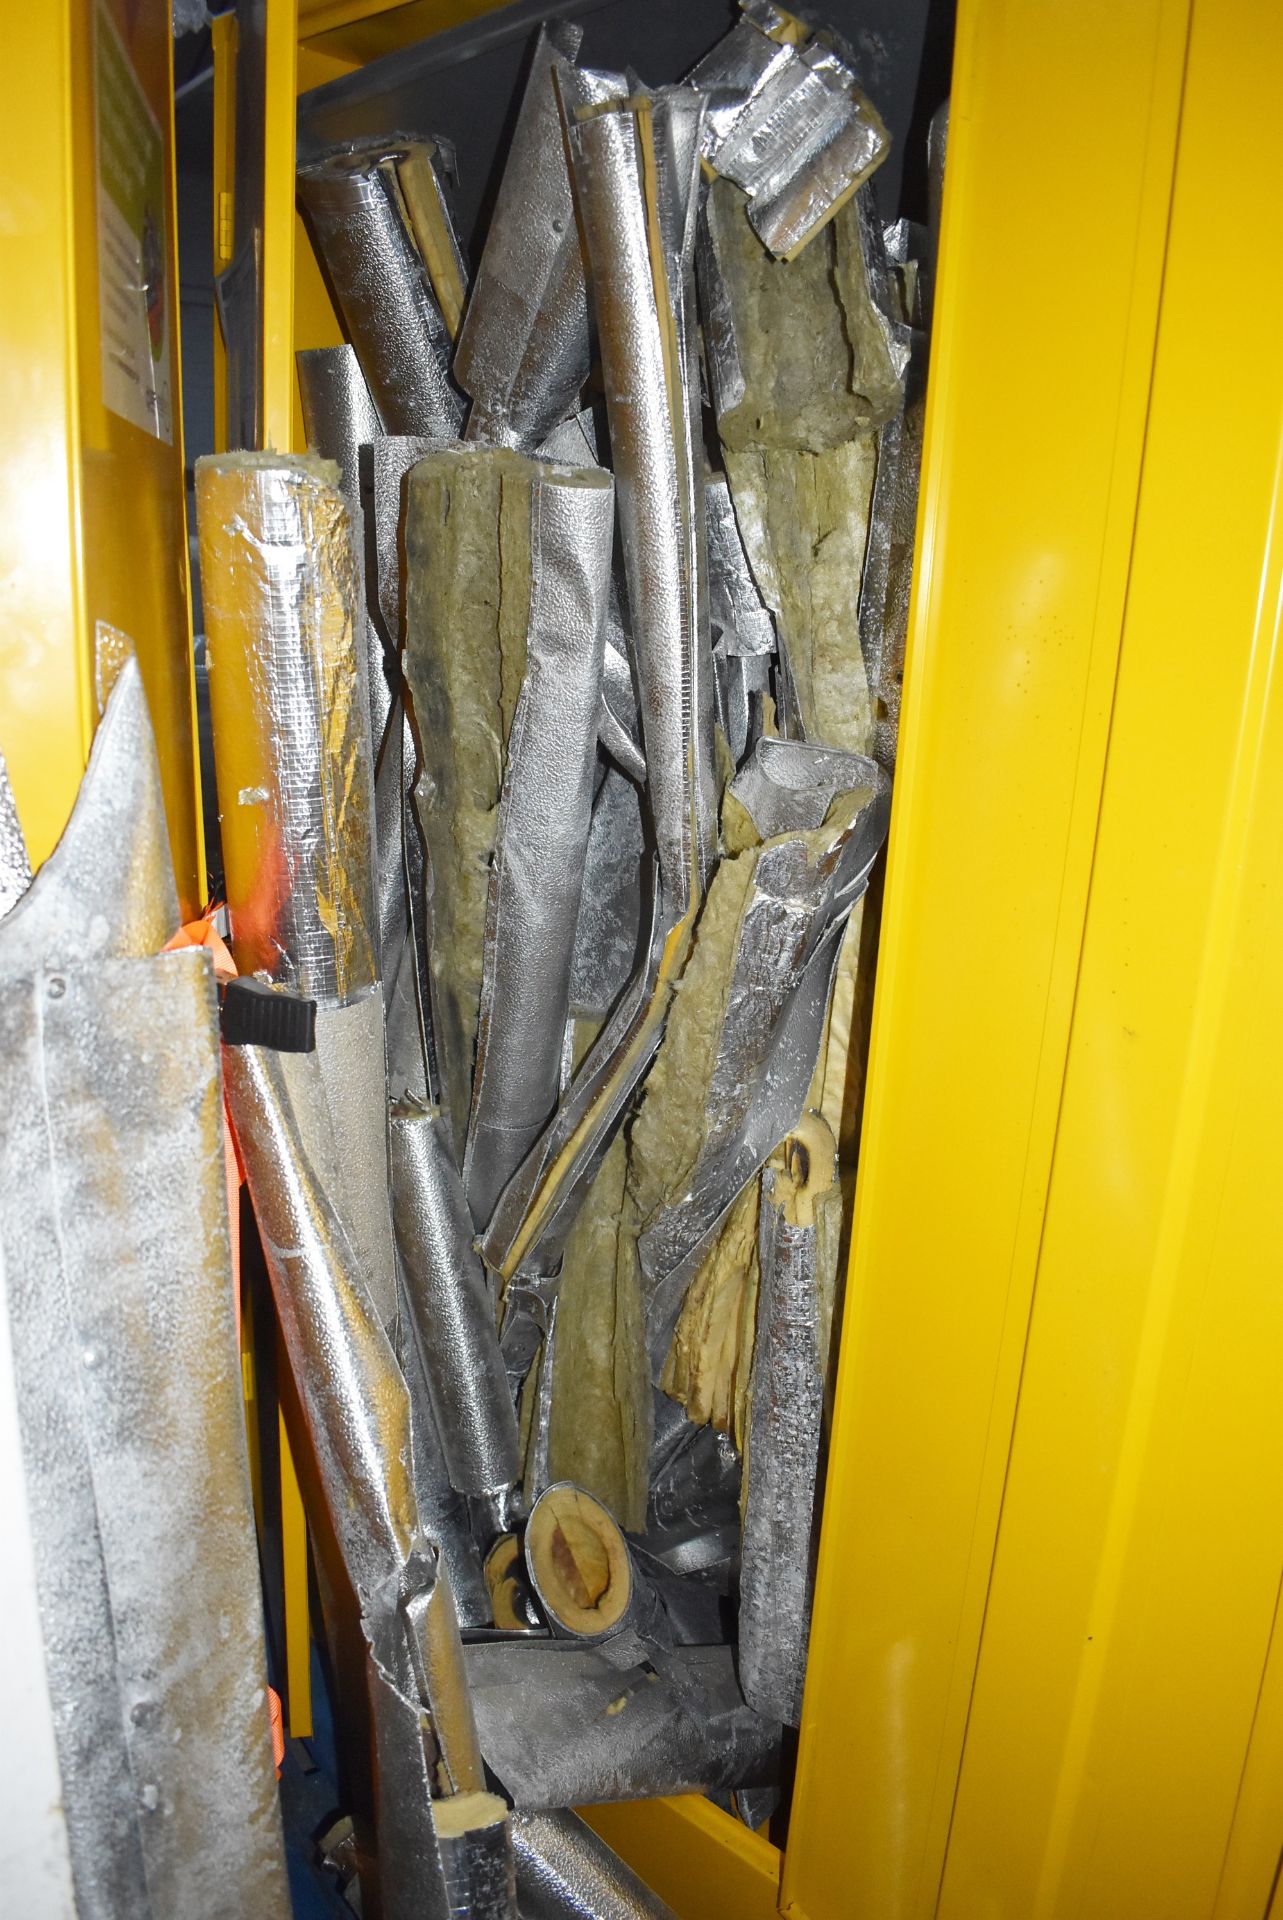 Large Quantity of Thermal Pipe Covering Contents of Two Upright Cabinets - Cabinets Not Included - - Image 4 of 10